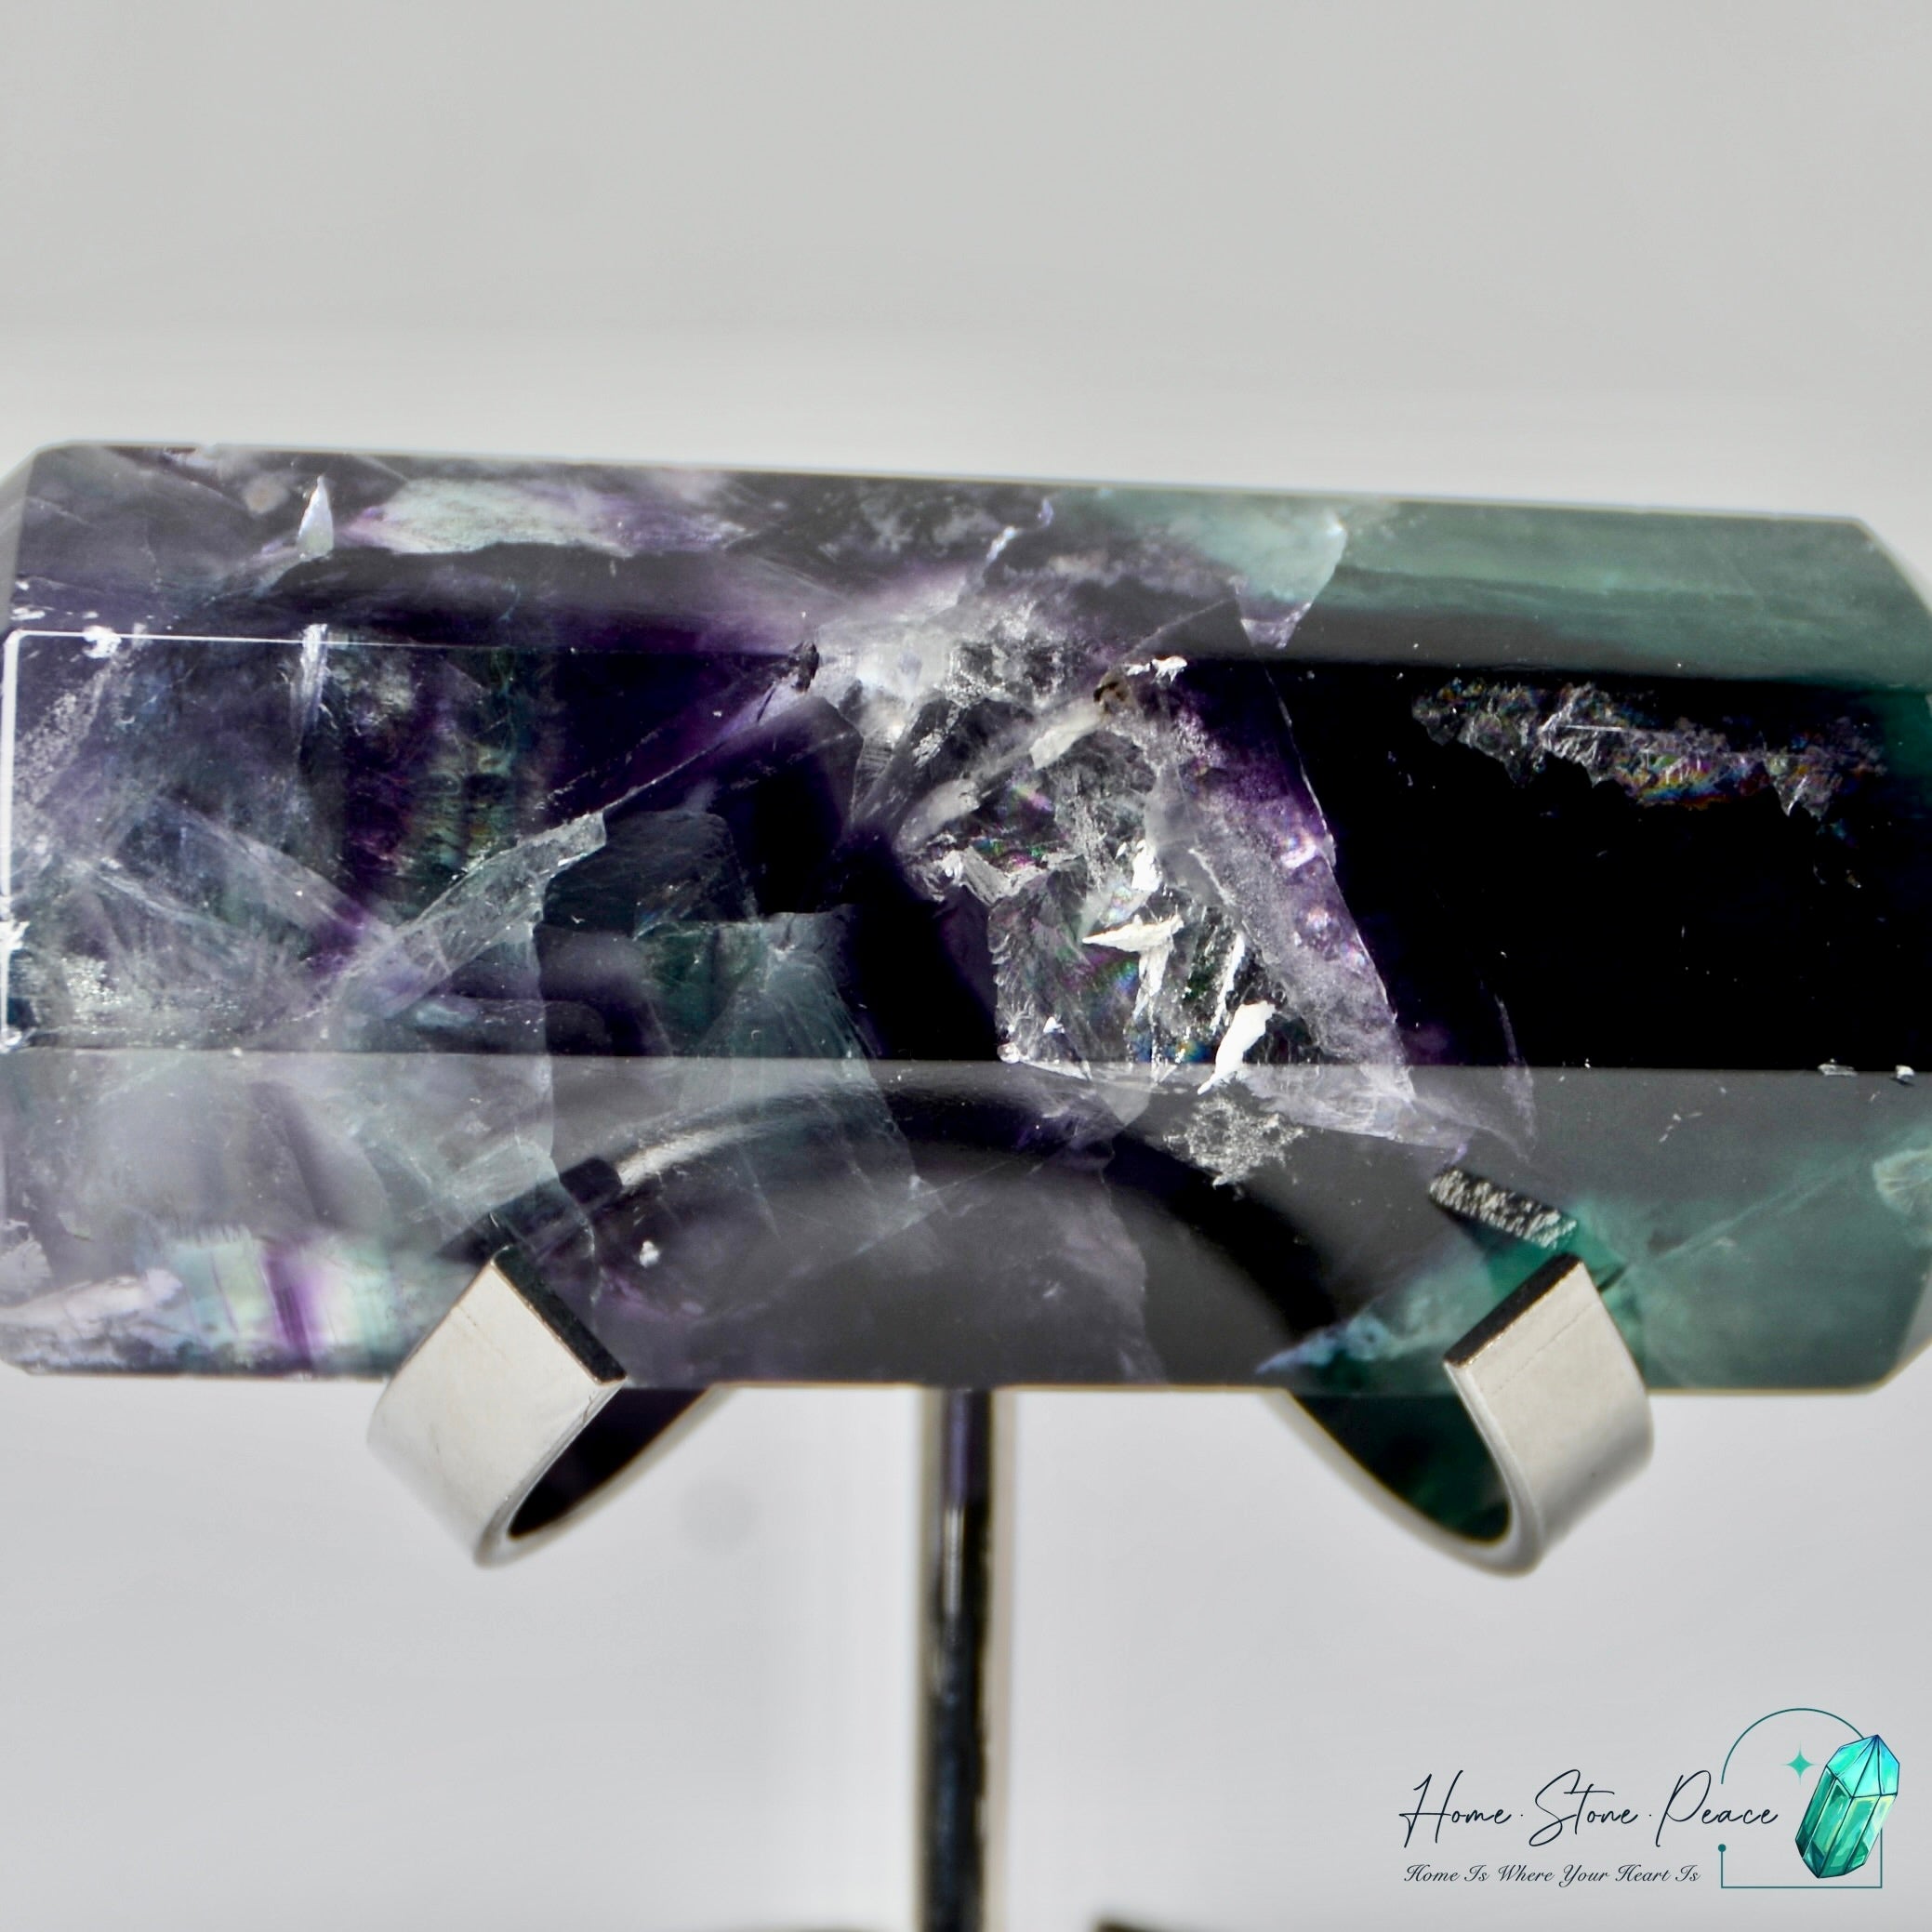 Double Terminated Fluorite Tower with Rainbows 雙尖彩虹螢石柱